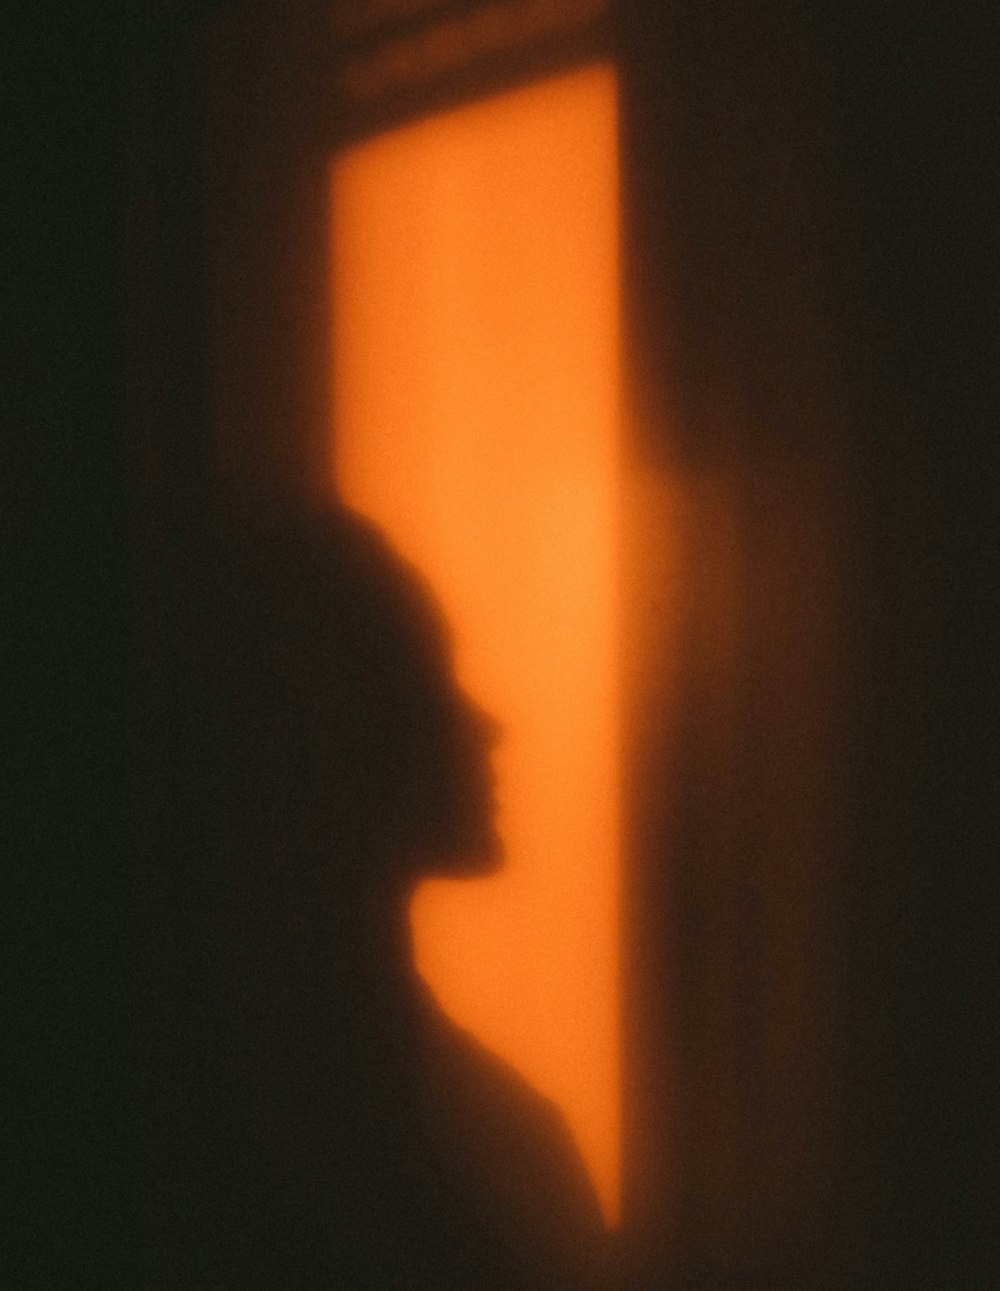 silhouette of person on orange background